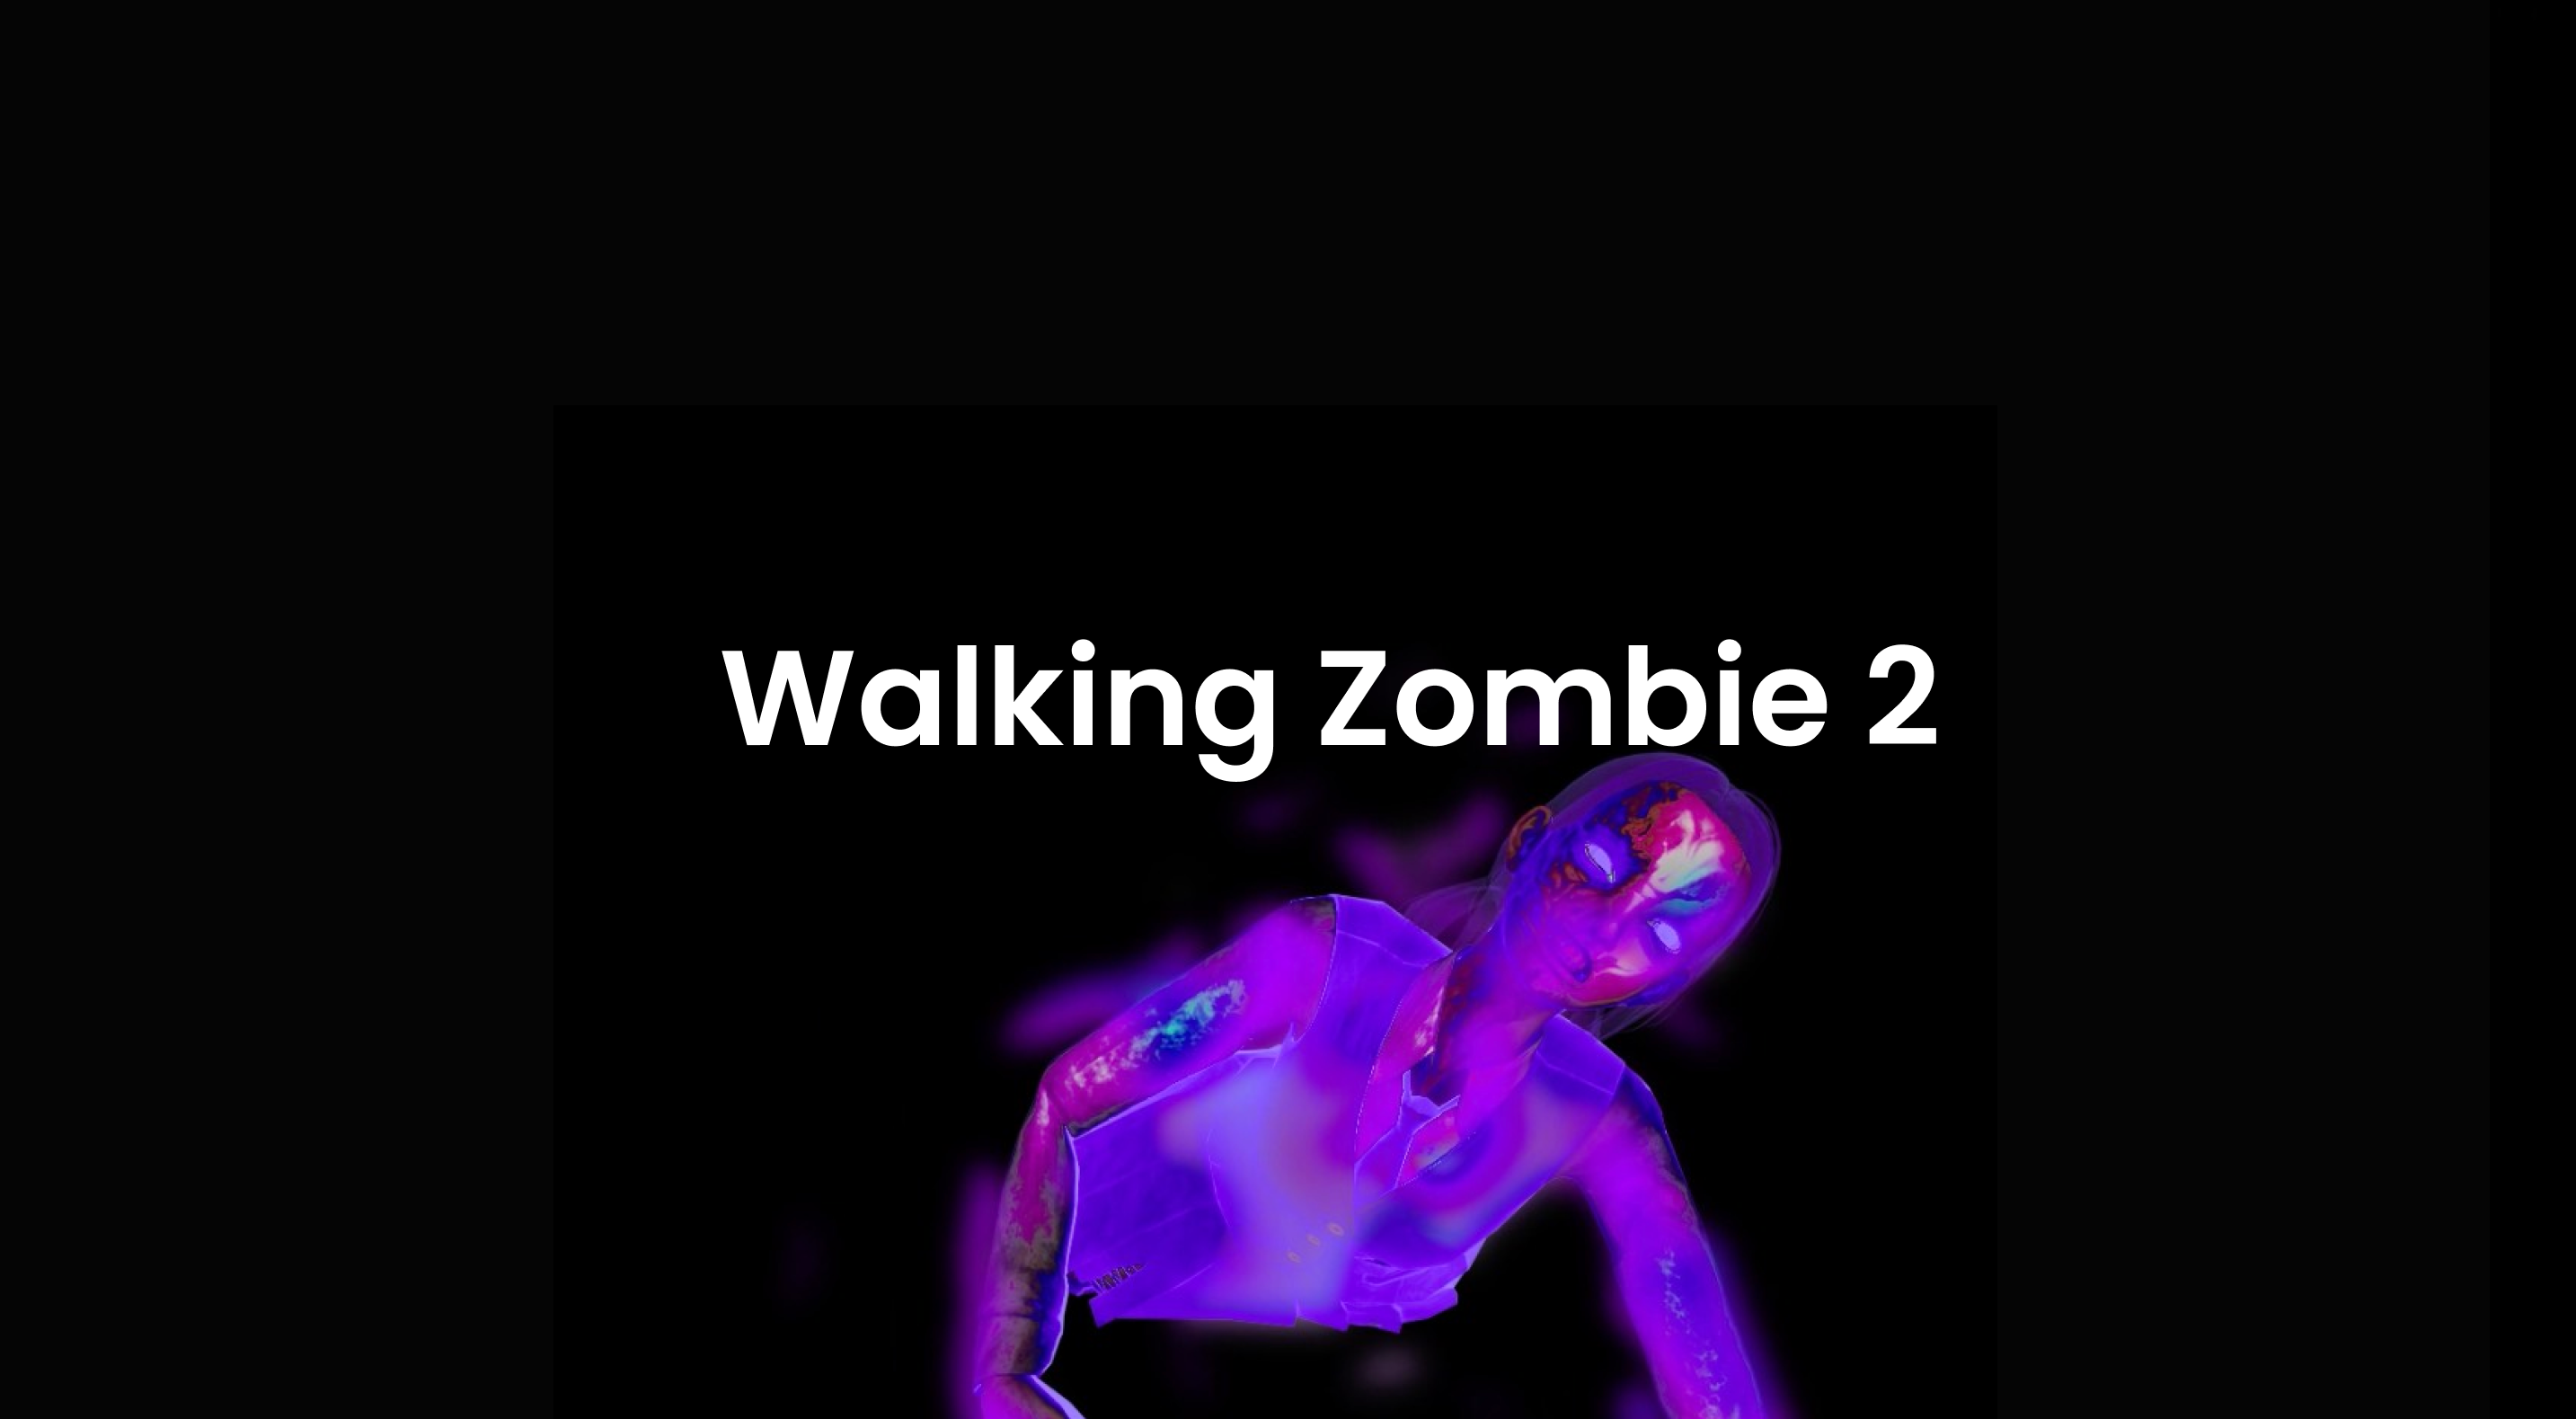 Walking Zombie, Halloween Digital Decorations for Haunted House